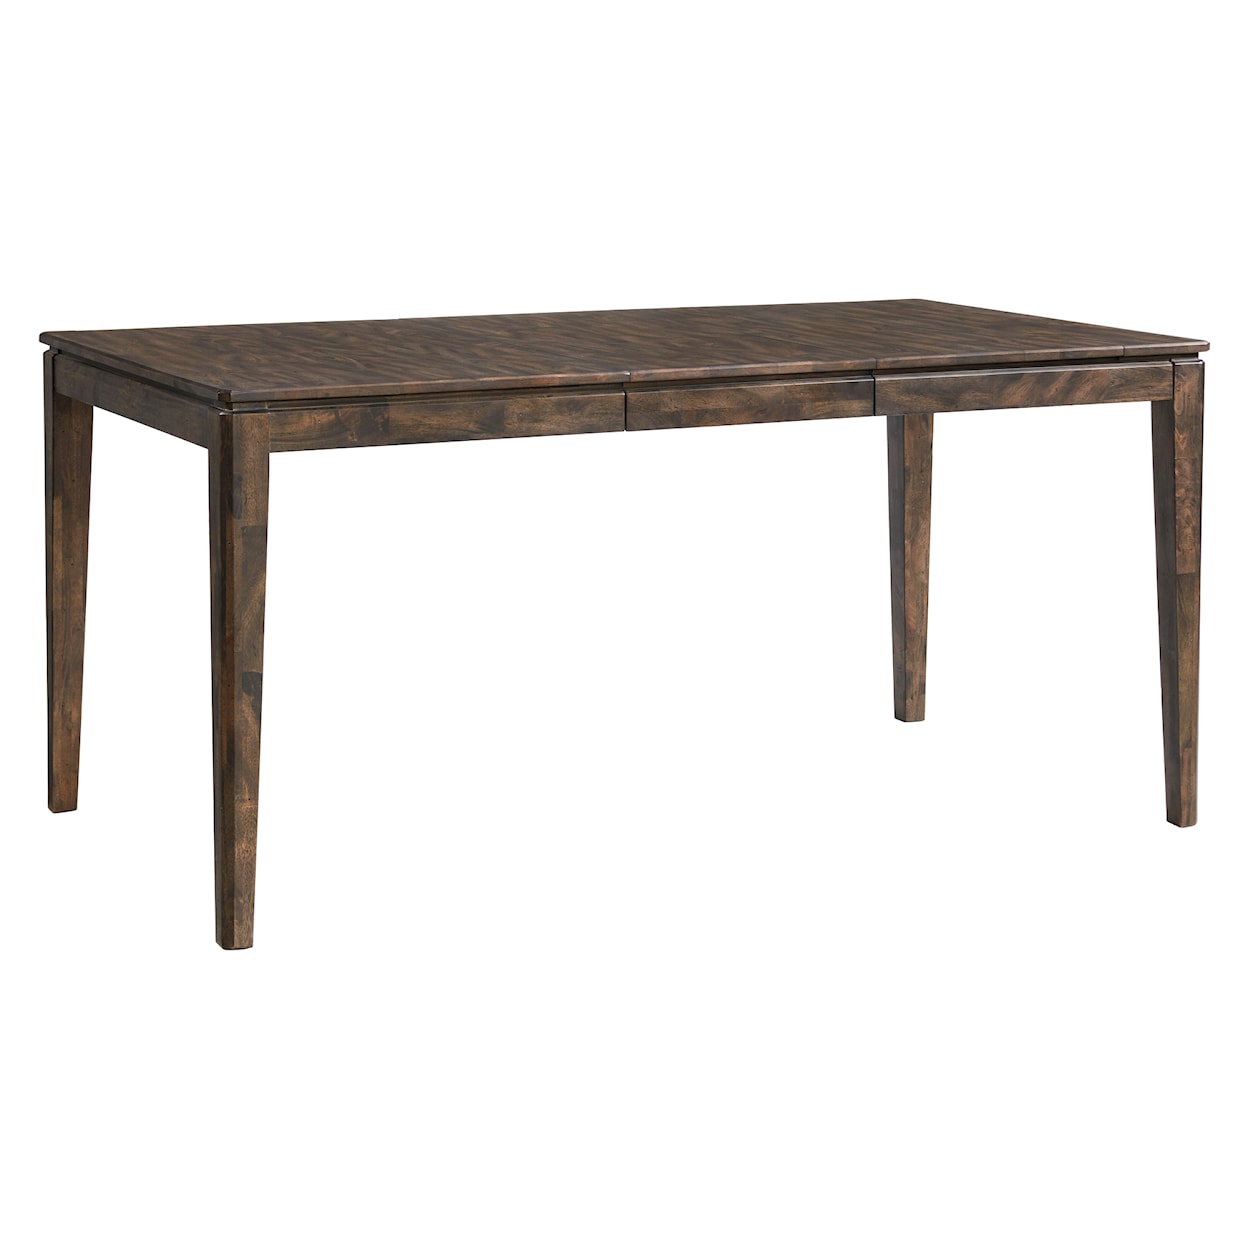 Intercon Kauai Expandable Counter Height Dining Table